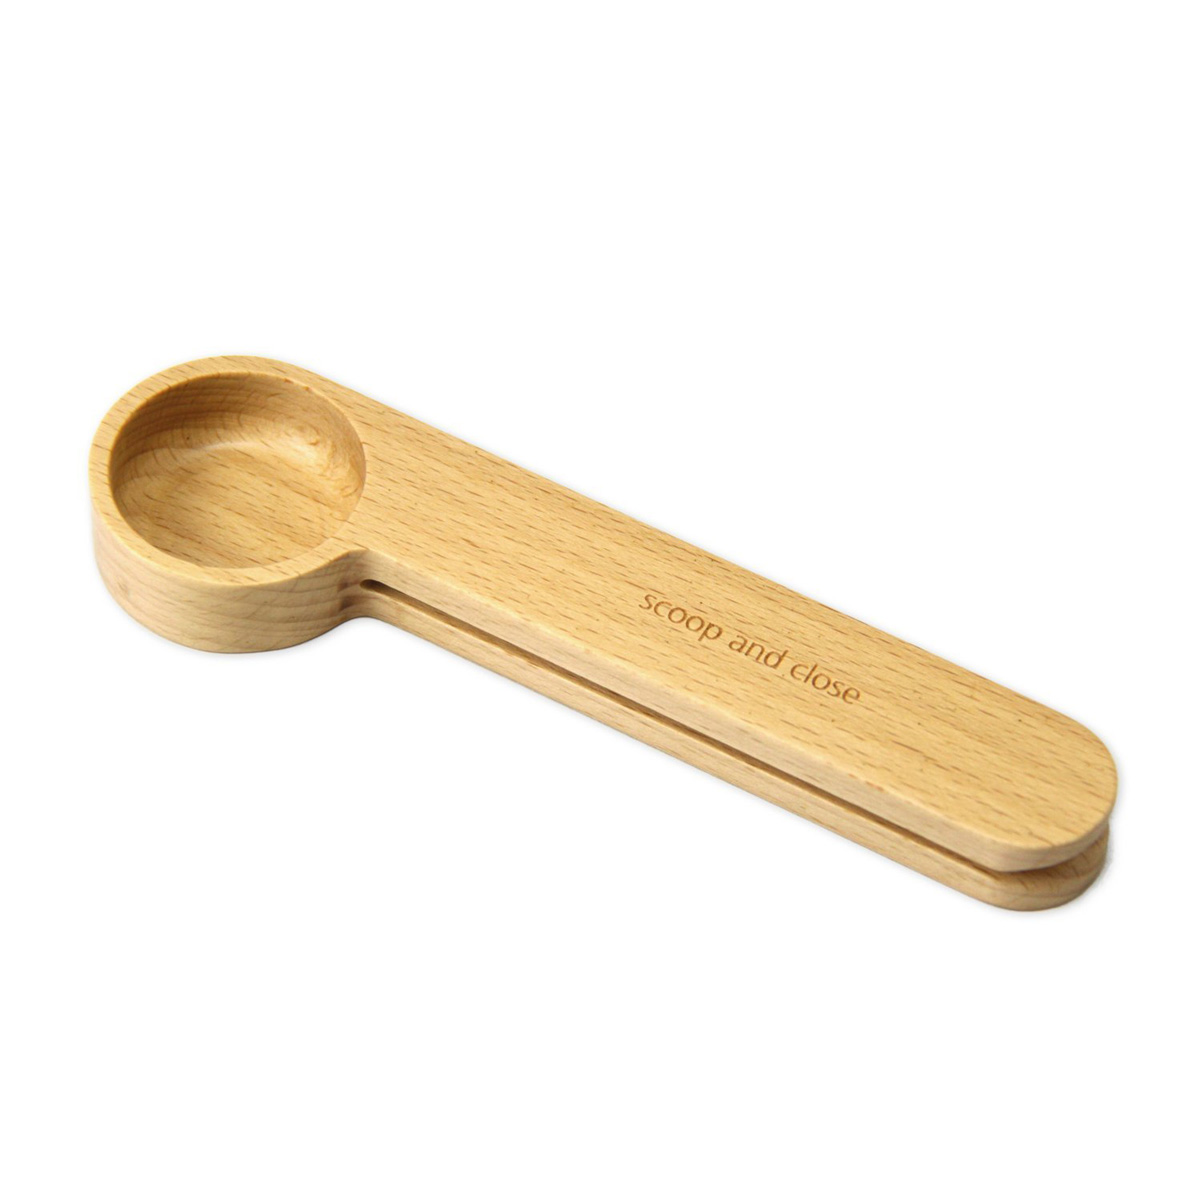 Espresso Coffee and Loose Herb Tea Wooden Coffee Scoop and Bag Clip Unique Coffee Lovers Gifts By Bar Amigos 1 Tablespoon Measure 2-in-1 Bags Sealer Measuring Spoon For Ground Beans